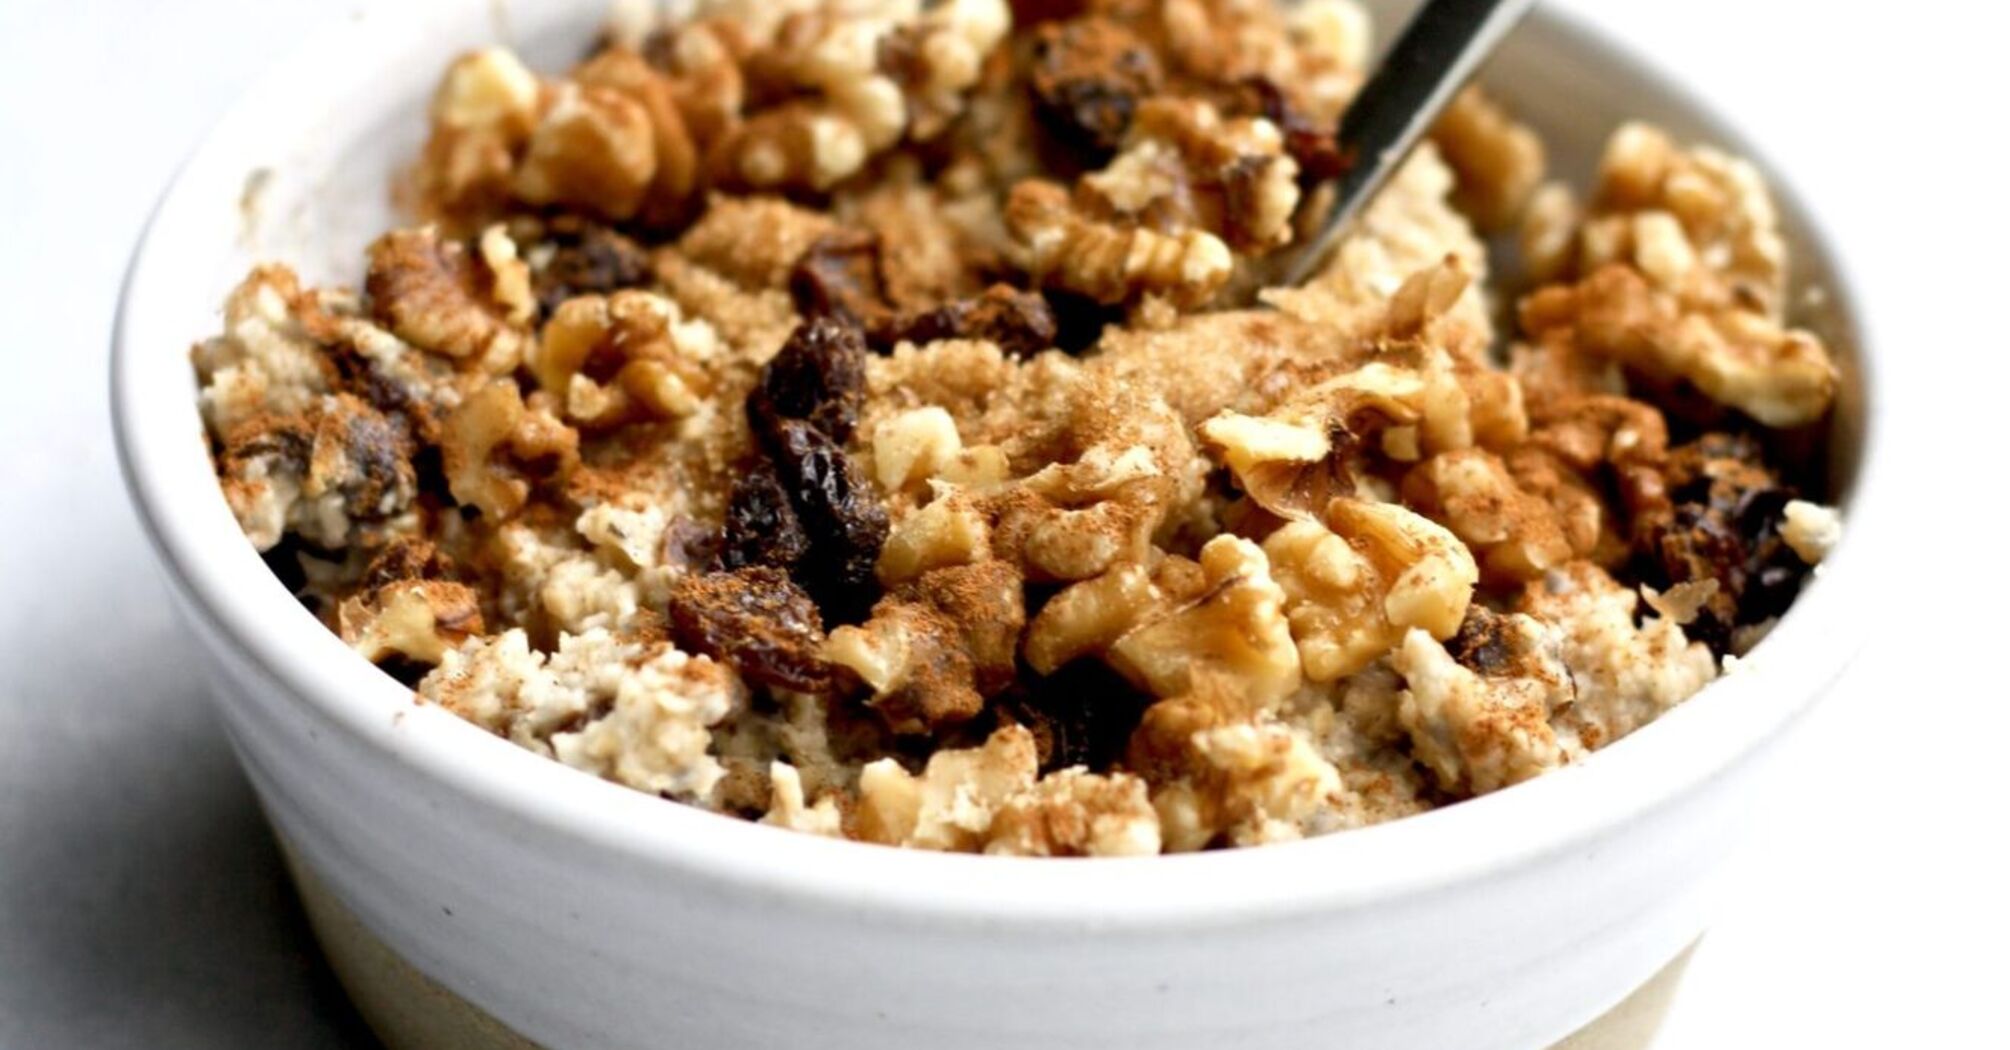 Sinabon-flavored oatmeal: how to make a healthy dessert